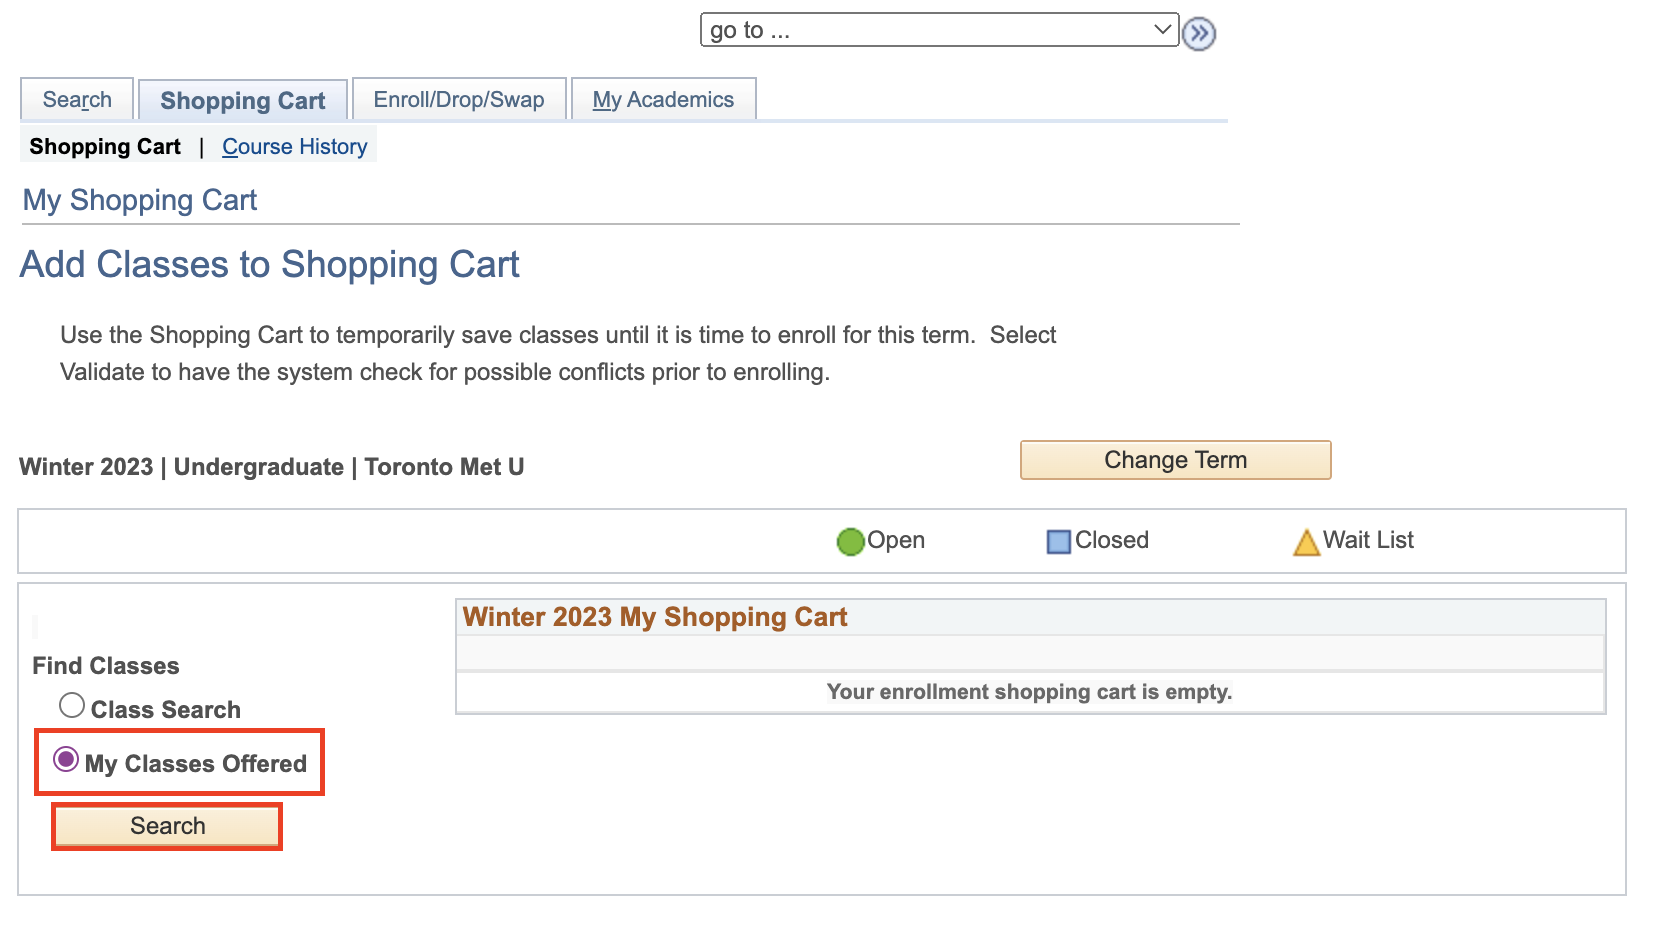 Add classes to shopping cart page with my classes offered and search button highlighted in red.